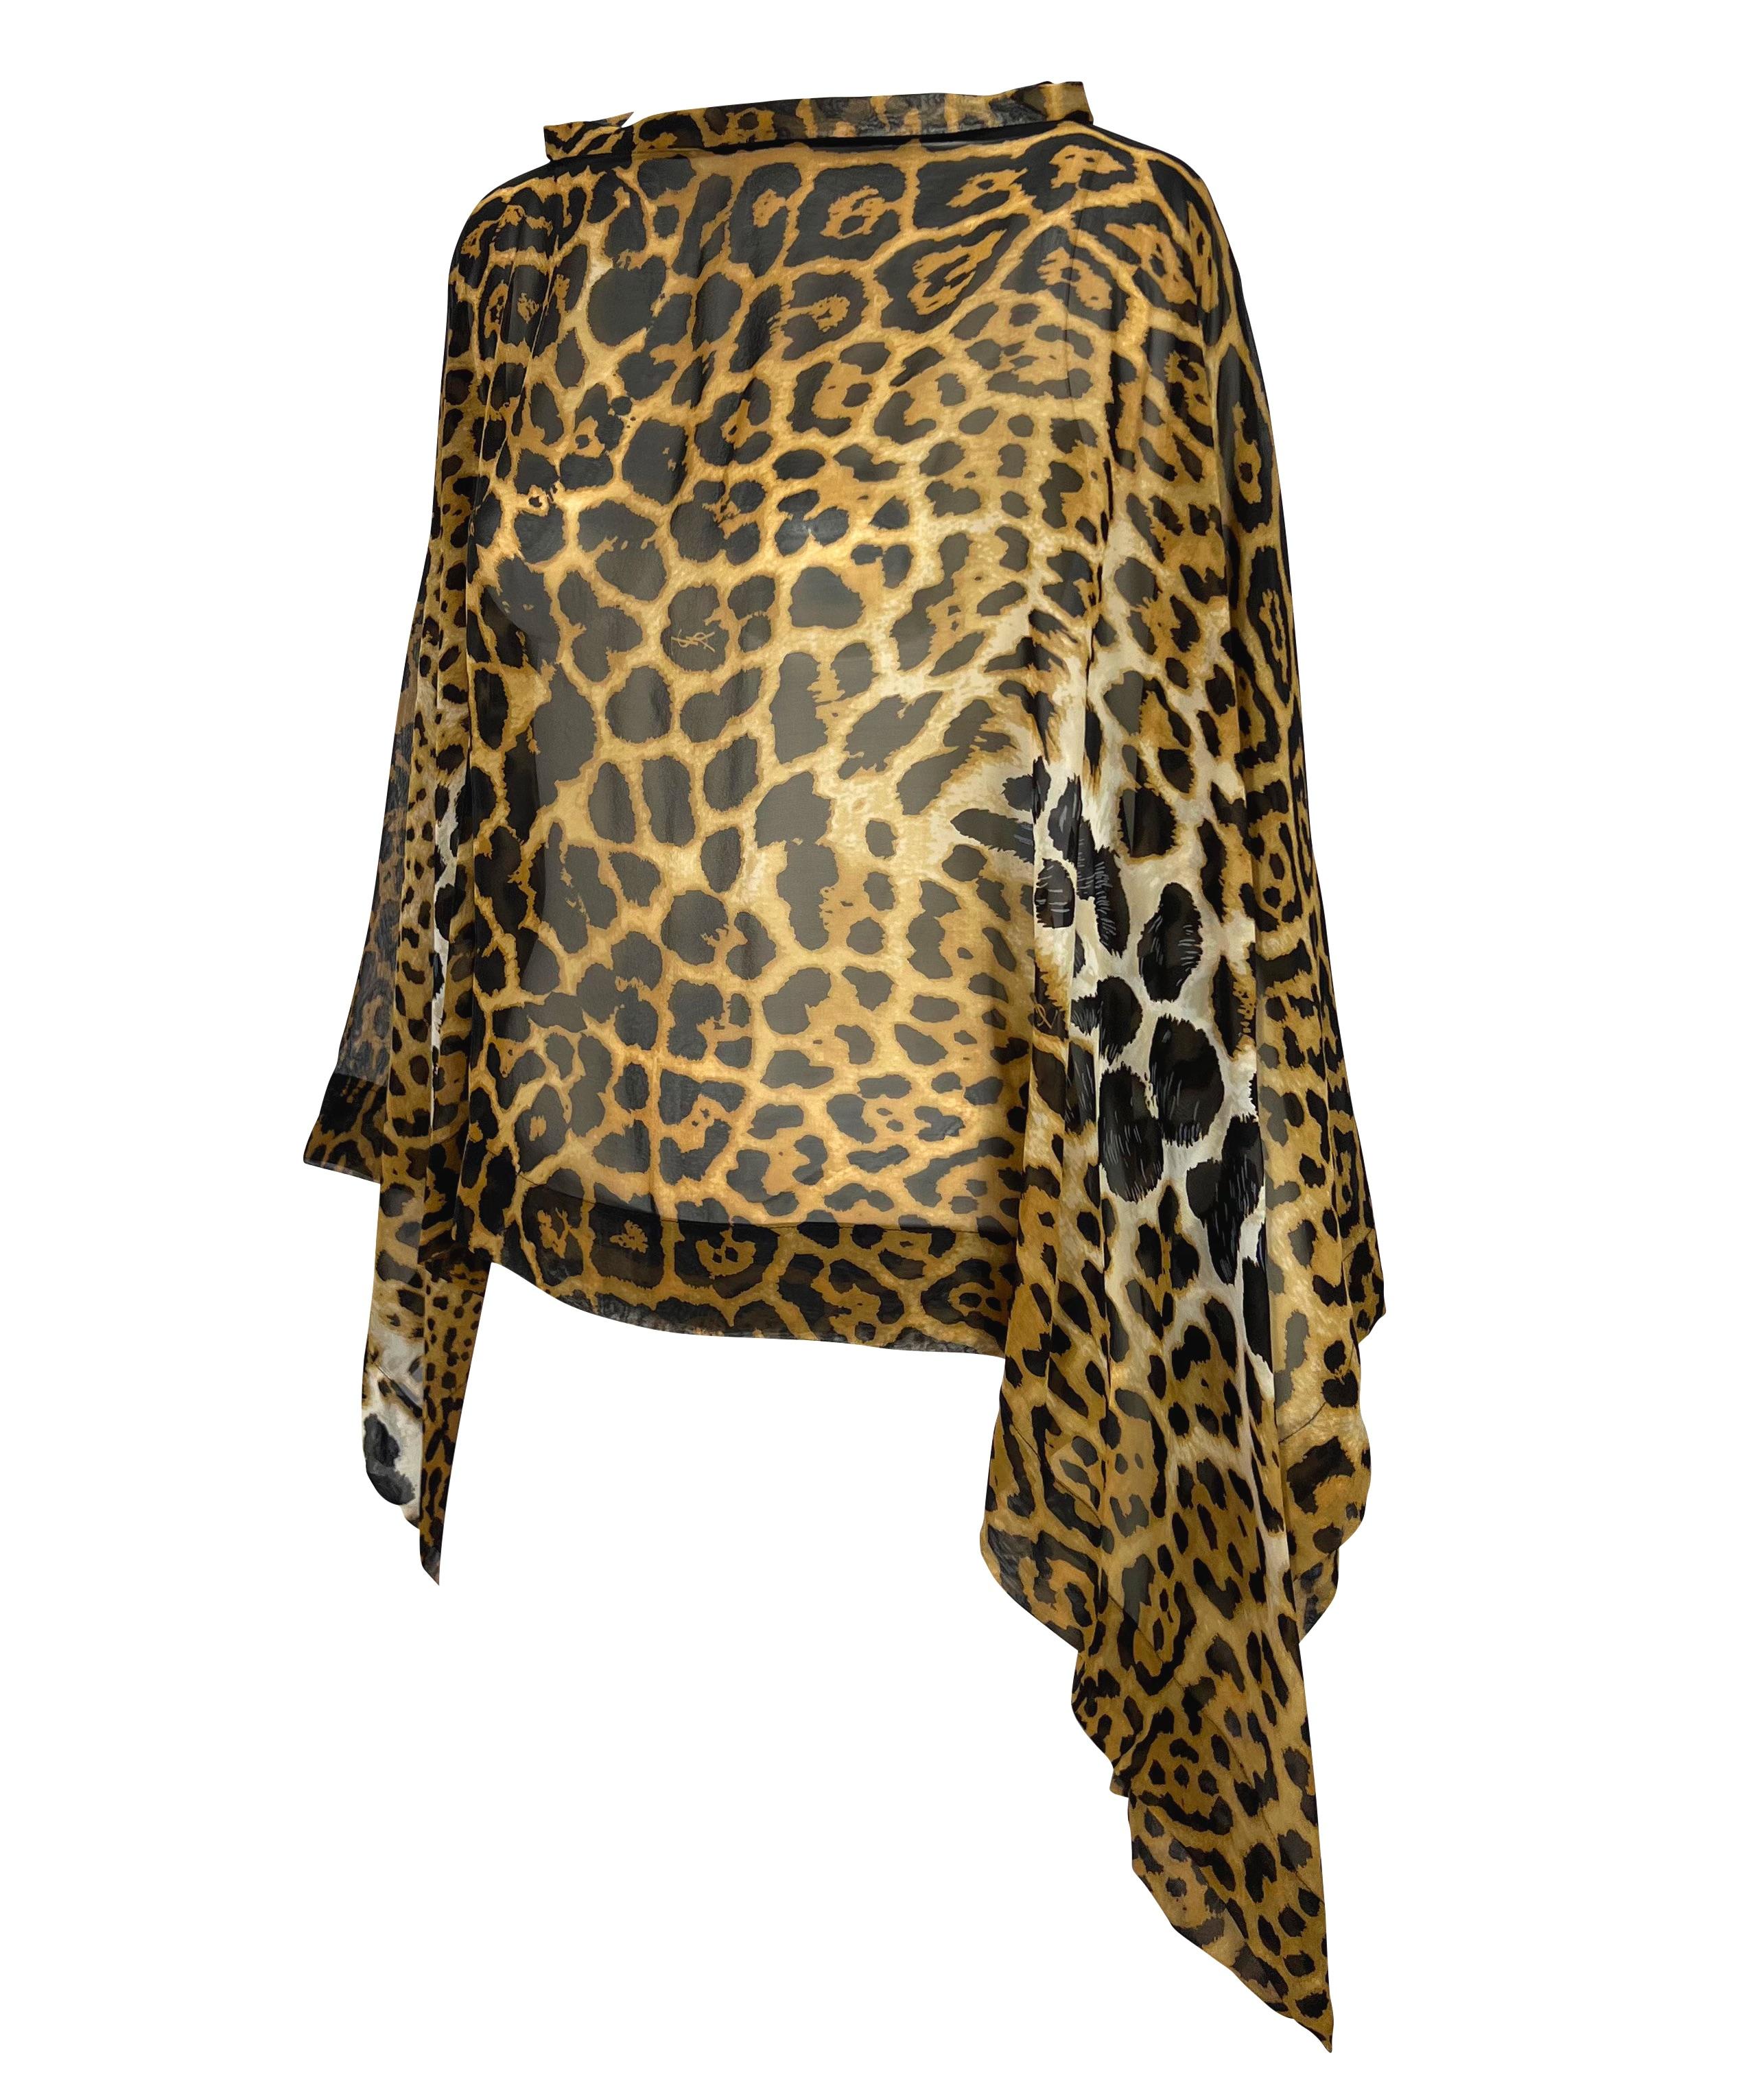 Presenting a stunning sheer cheetah print Yves Saint Laurent Rive Gauche poncho, designed by Tom Ford. From the Spring/Summer 2002 collection, the same cheetah print was heavily used in the season's collection. Perfectly versatile, this top adds the